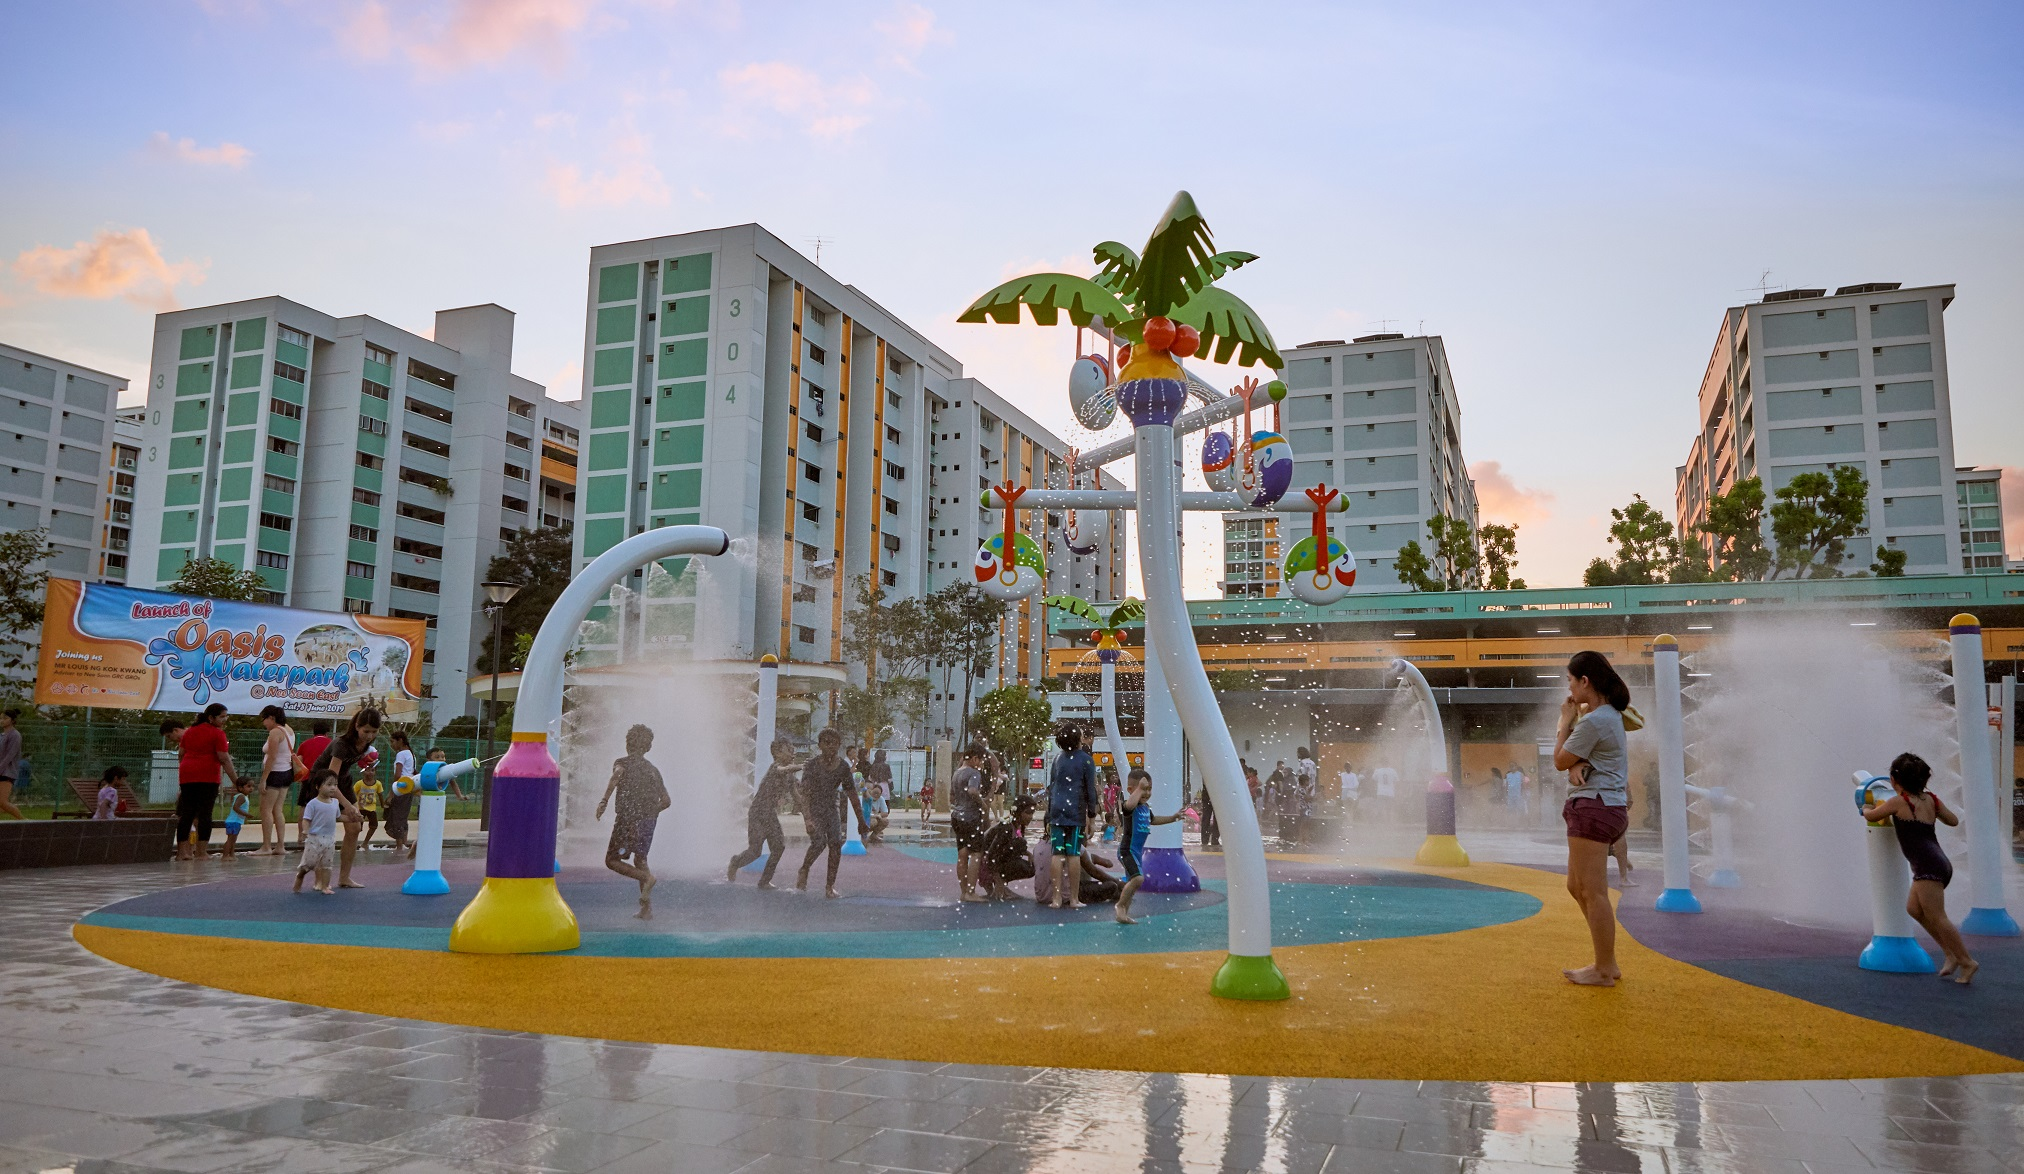 Yishun-based water play zone featuring a cascading water curtain and life-sized board game elements, with nearby vending machines for refreshments.